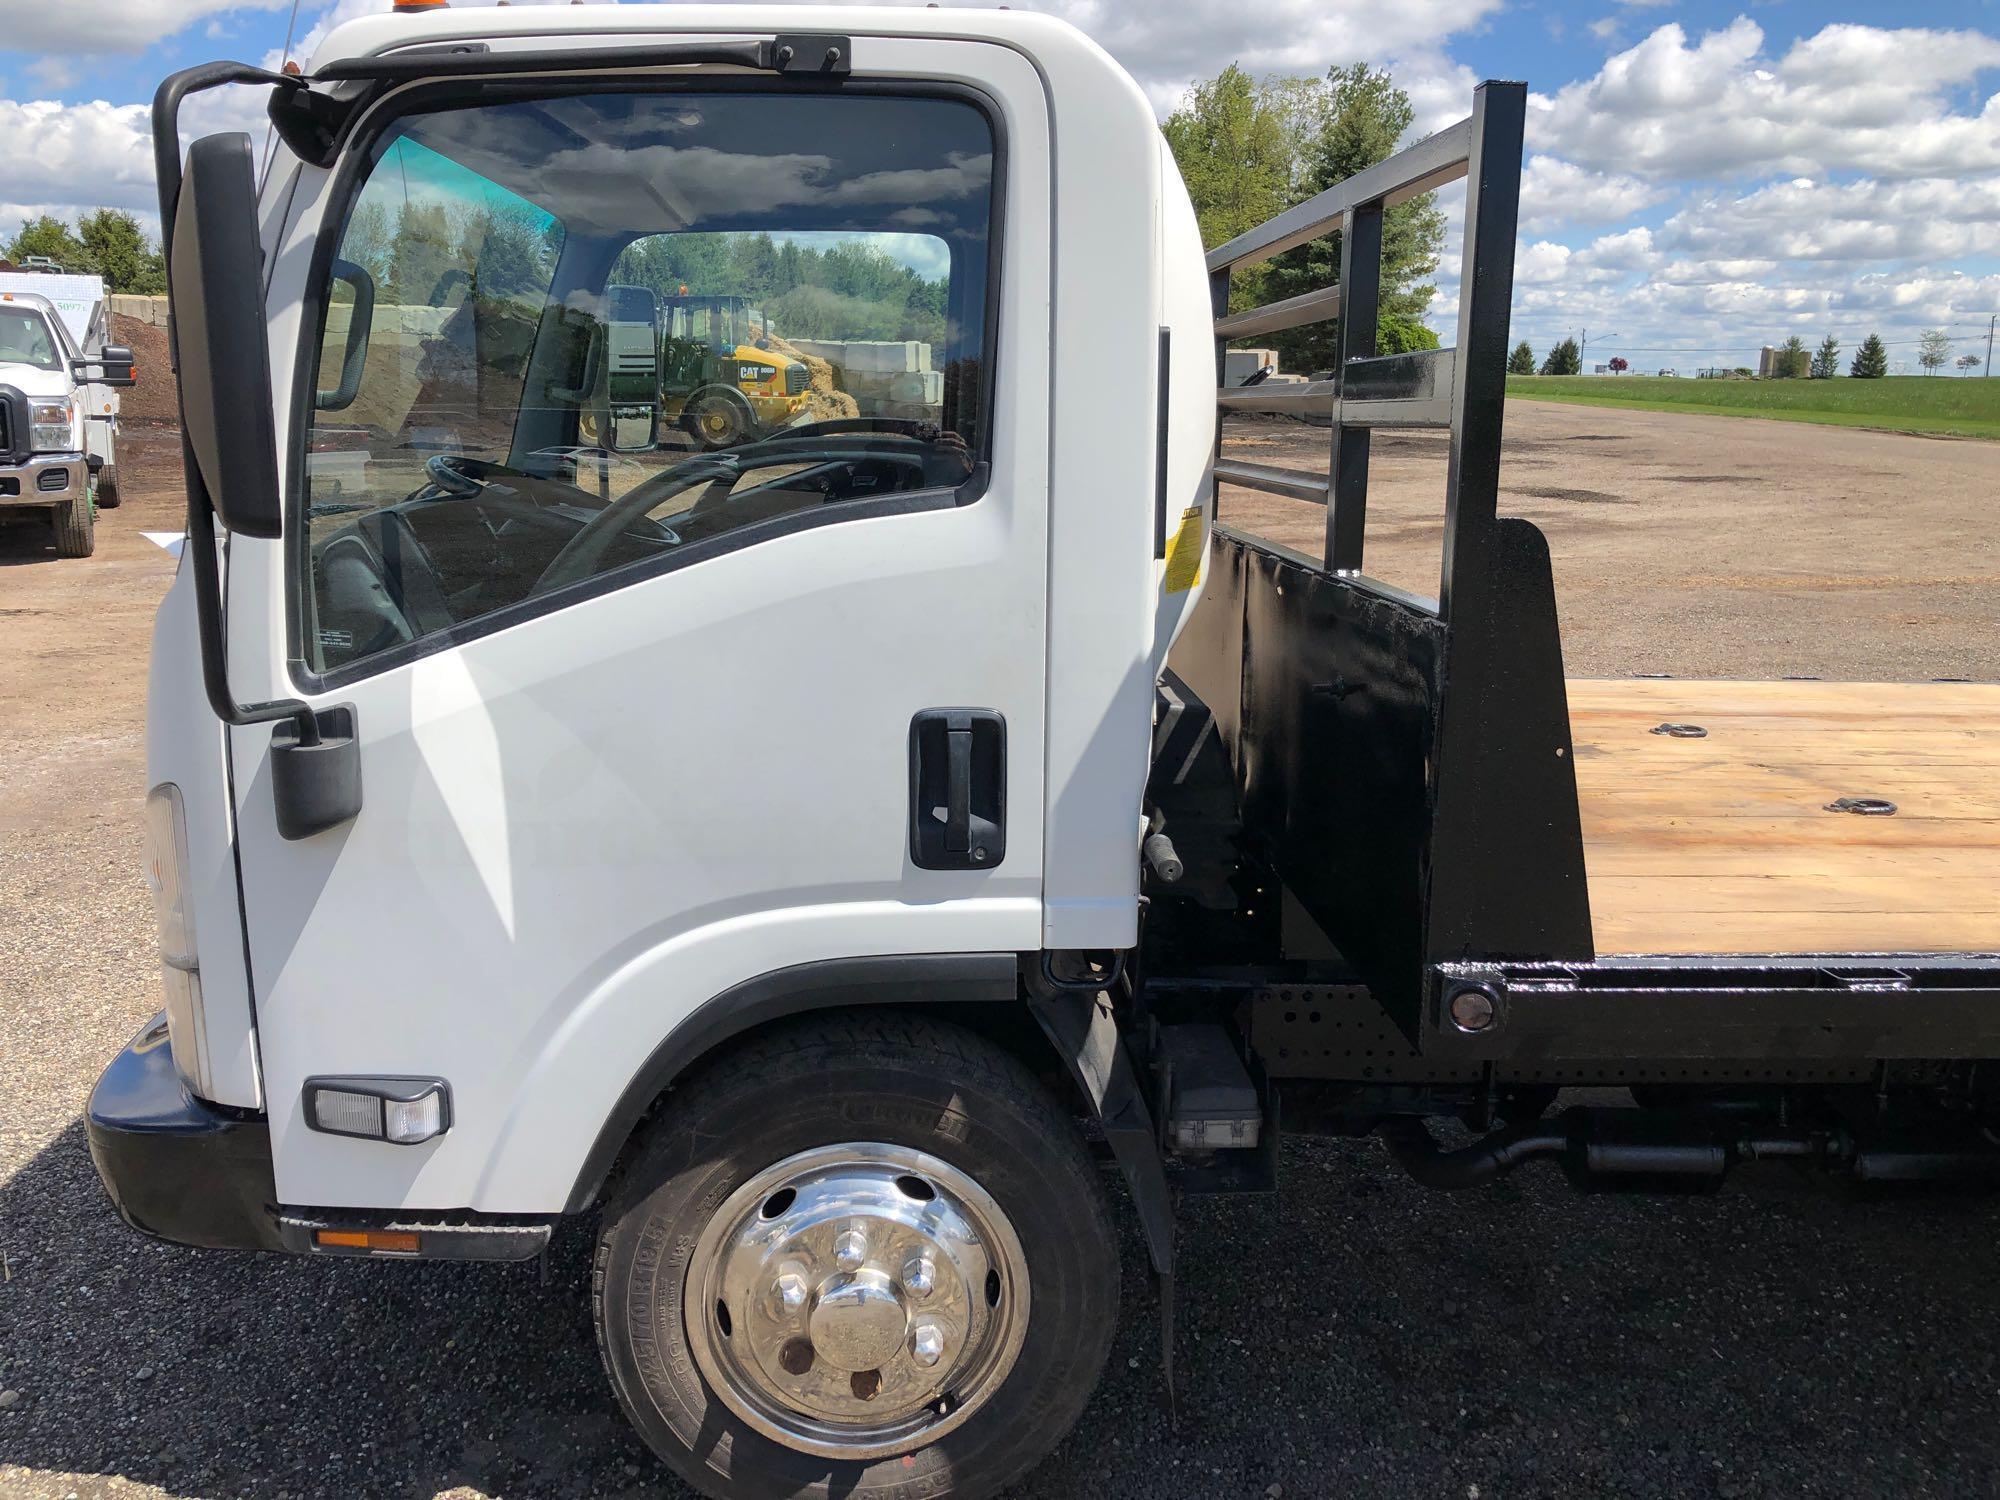 2013 Isuzu cabover flatbed truck with 50,774 miles